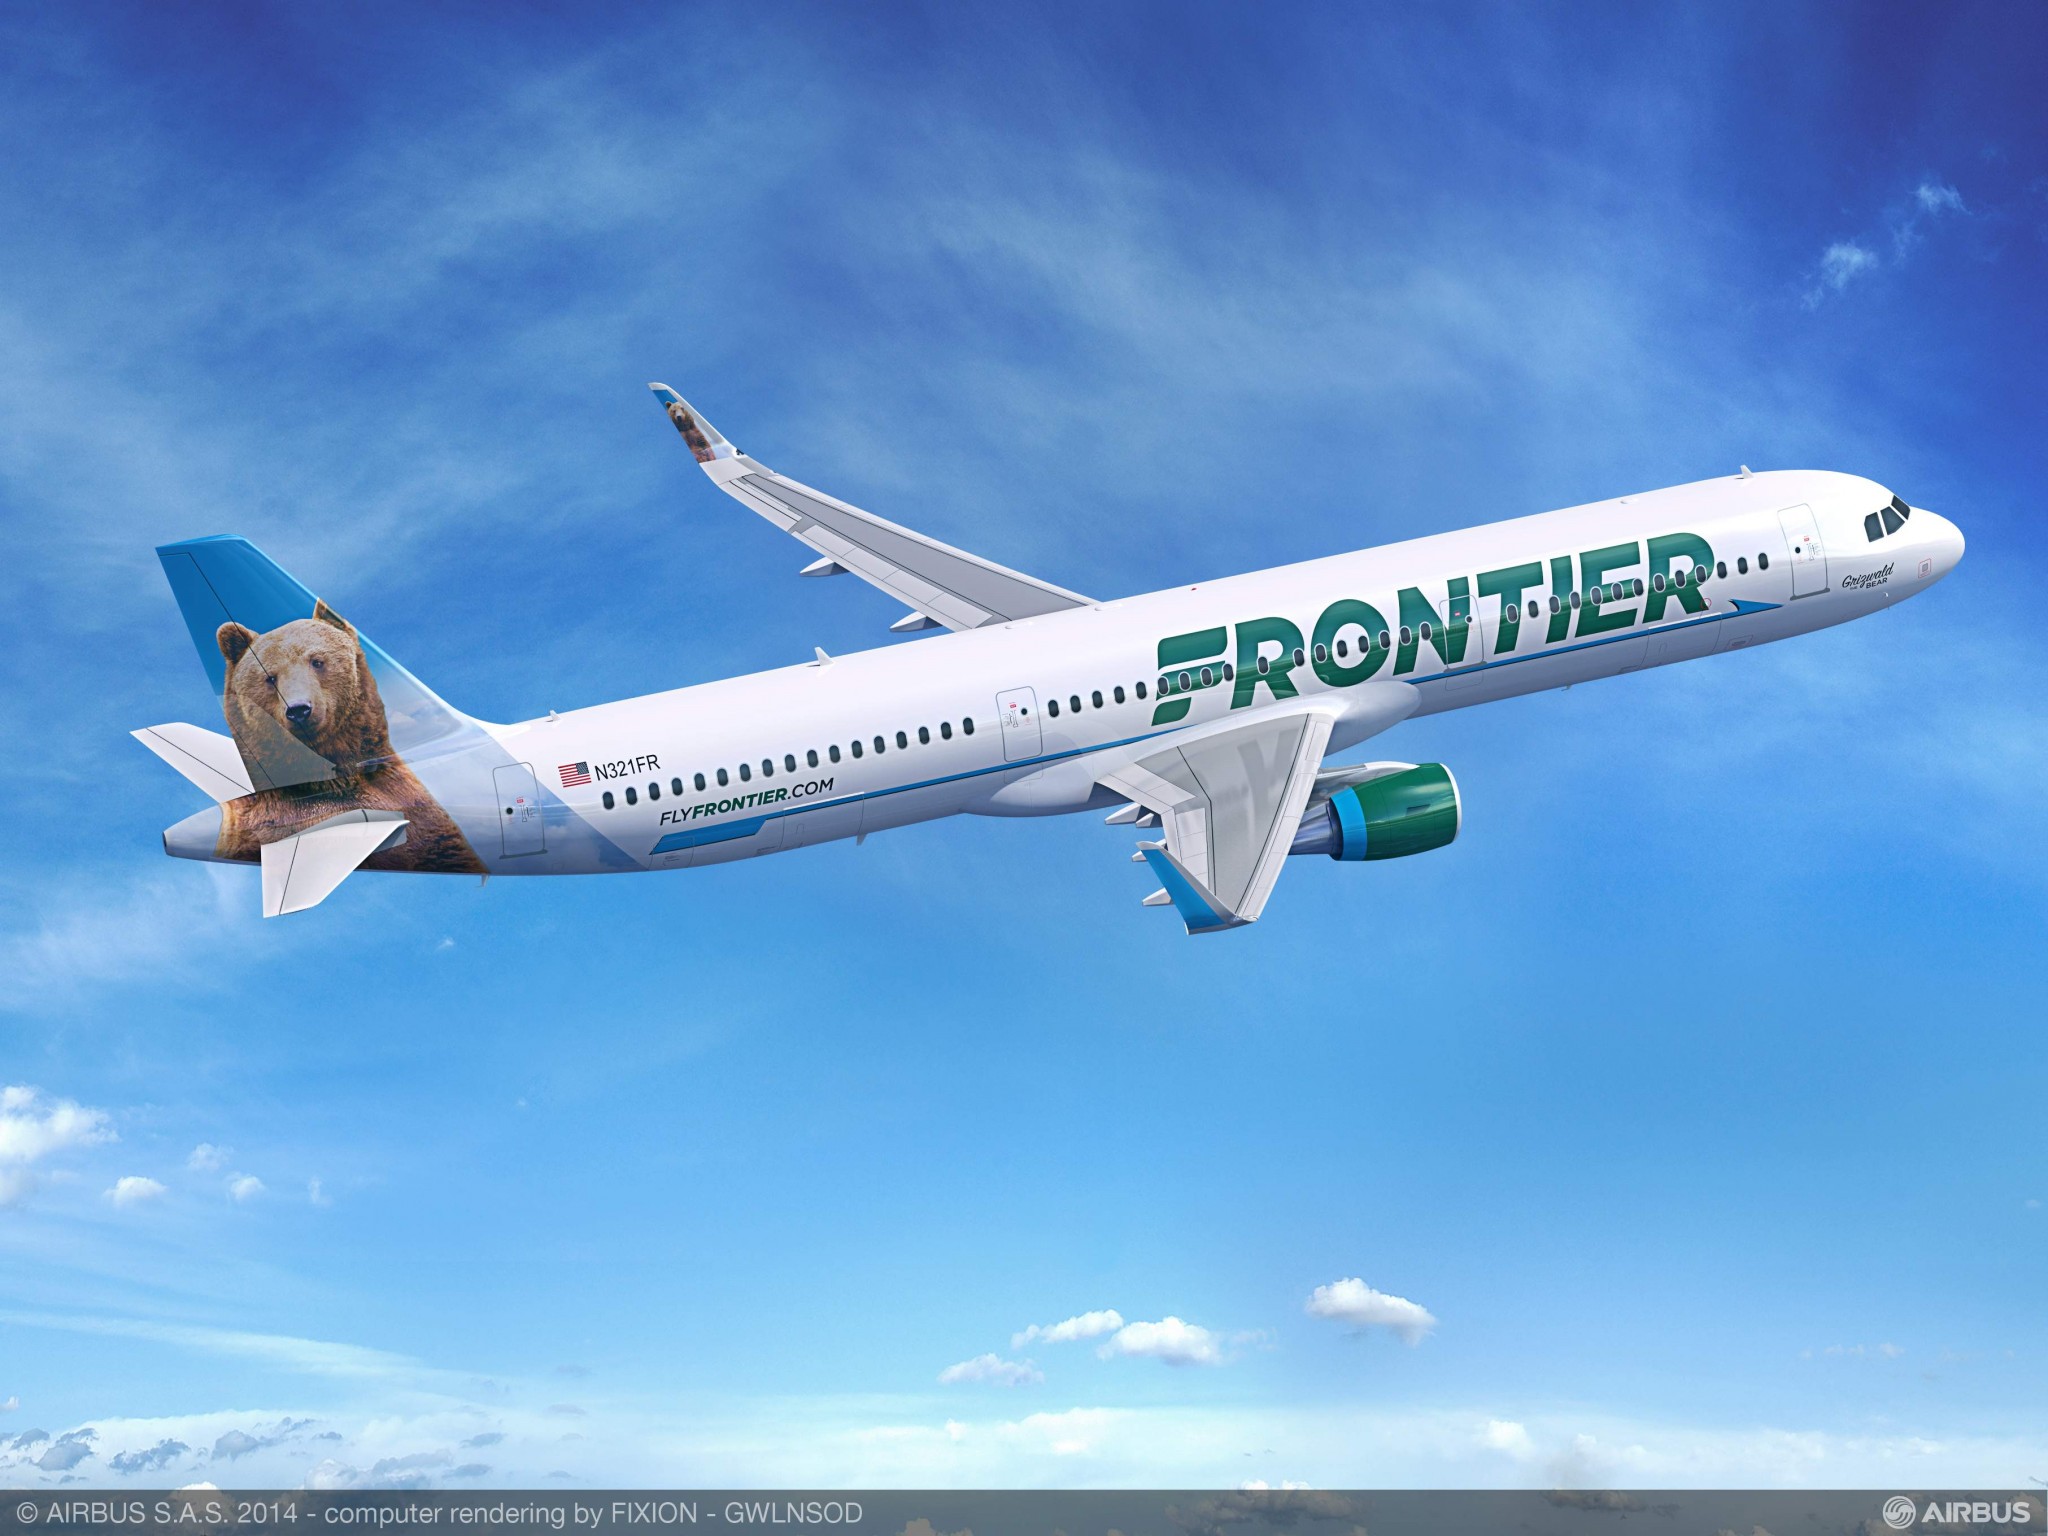 Frontier Airlines records $13 million loss but highest-ever Q1 revenue